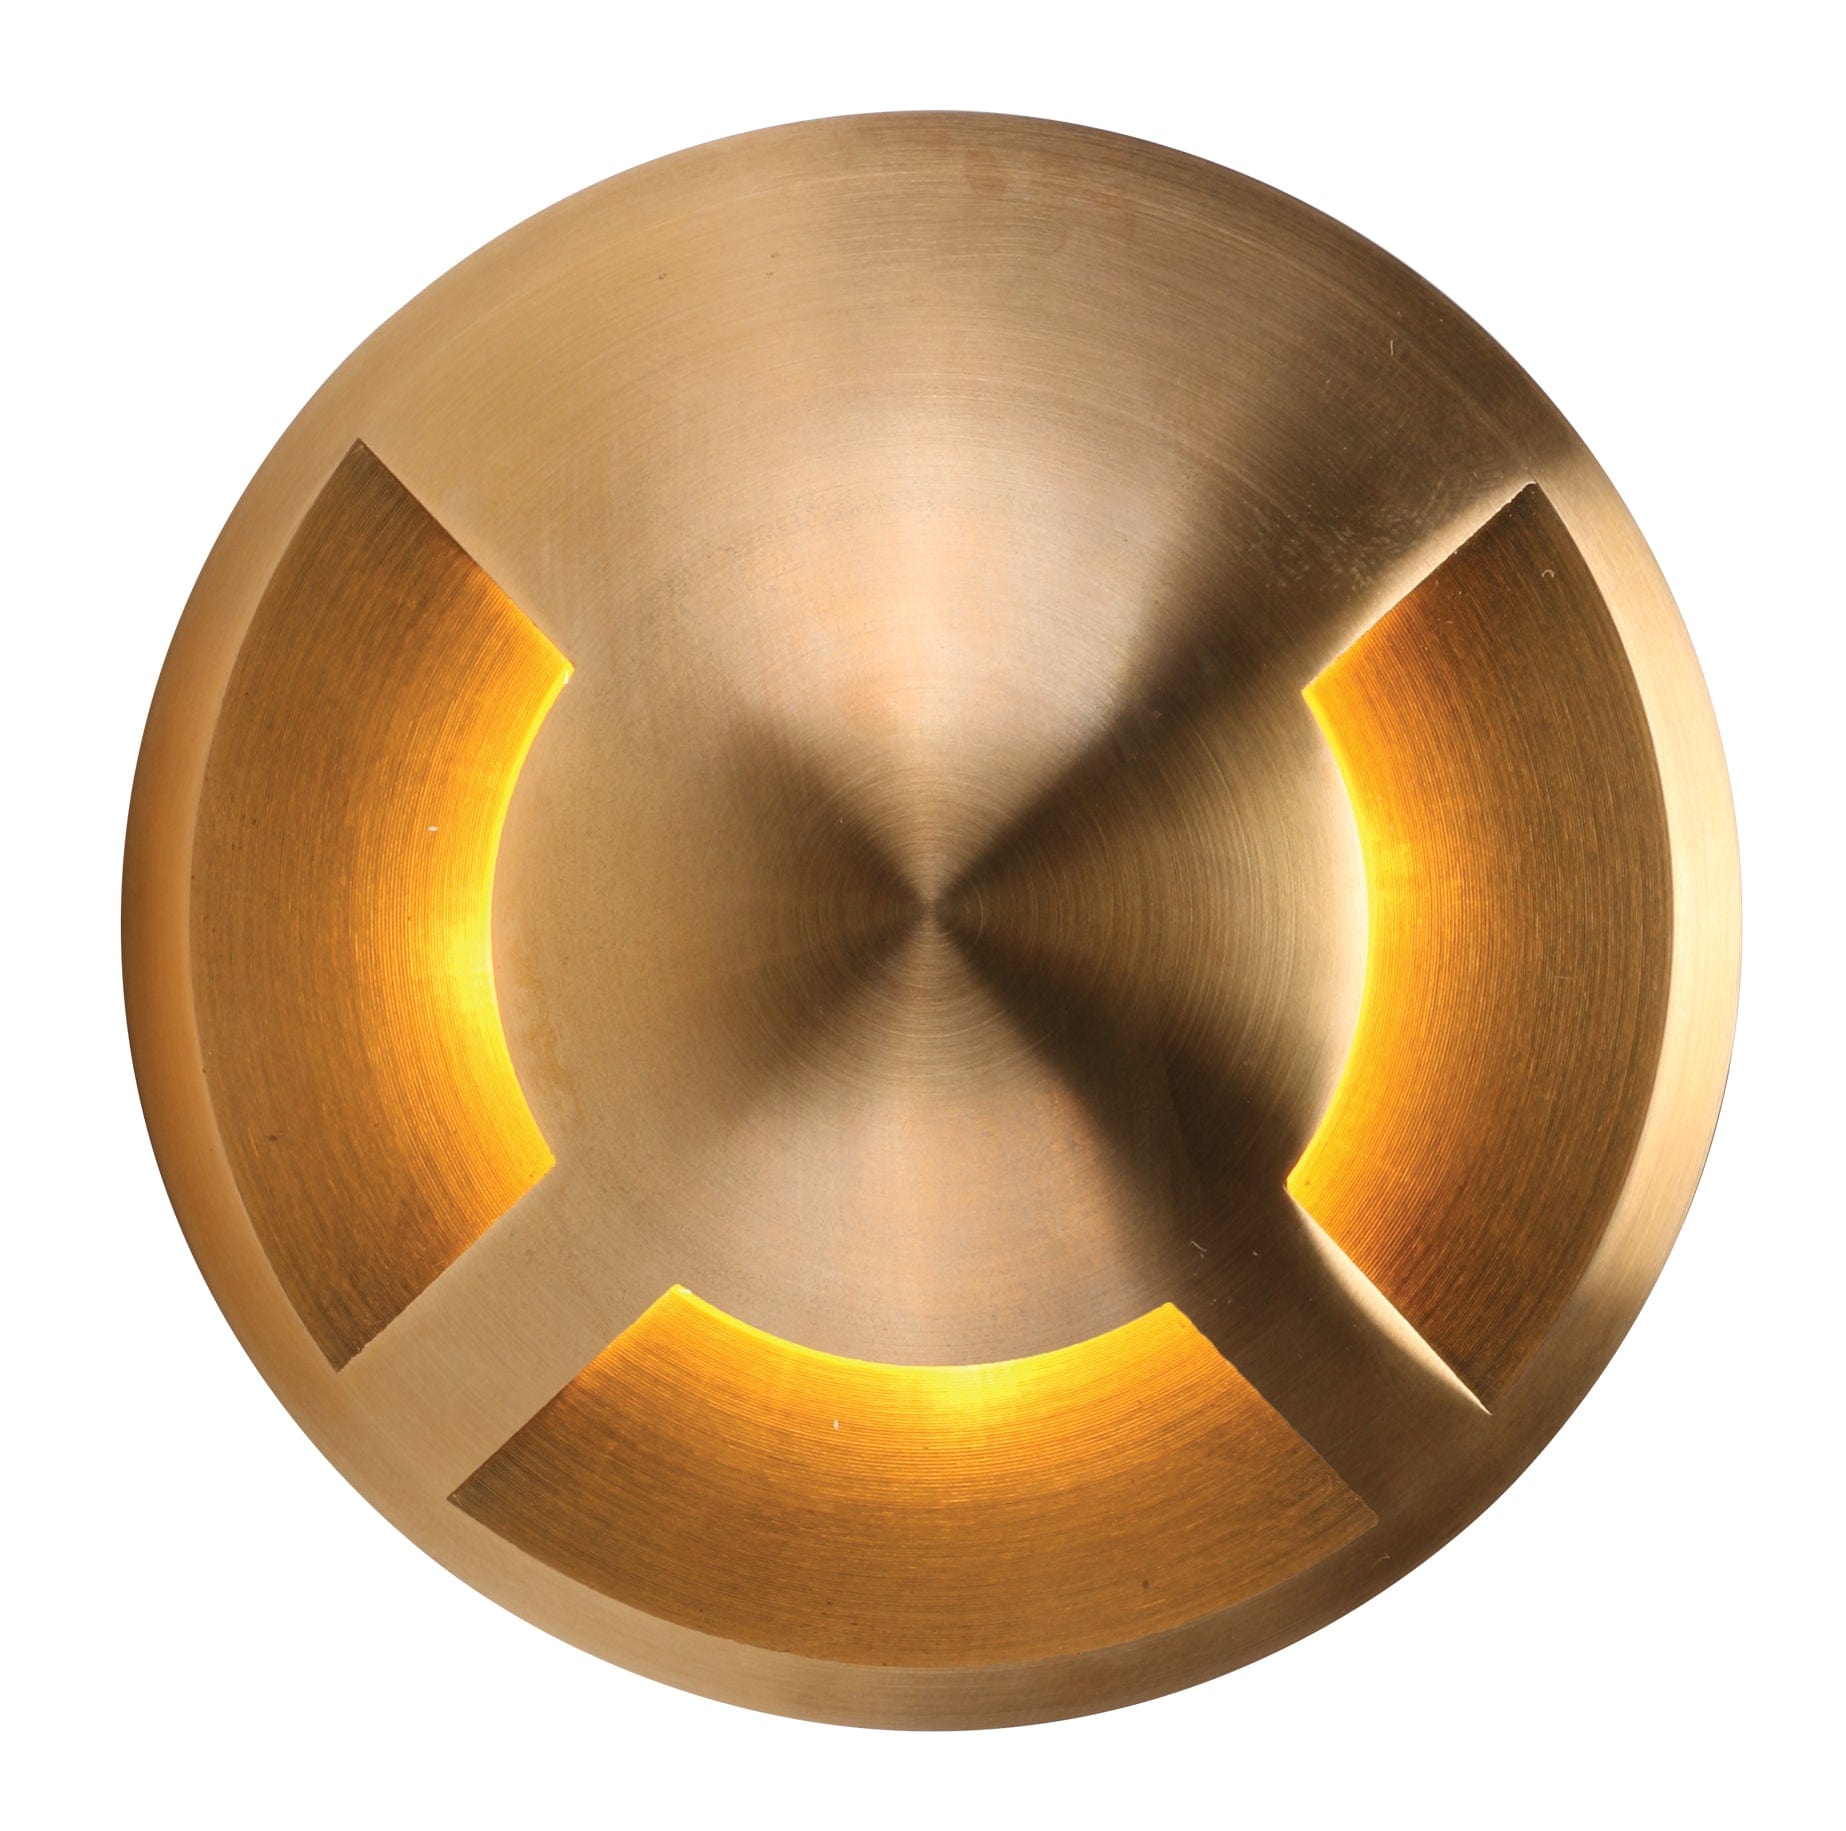 Domus Lighting Step Lights Cover Brass / 3 DEKA-COVER Round COVER ONLY Lights-For-You 19446